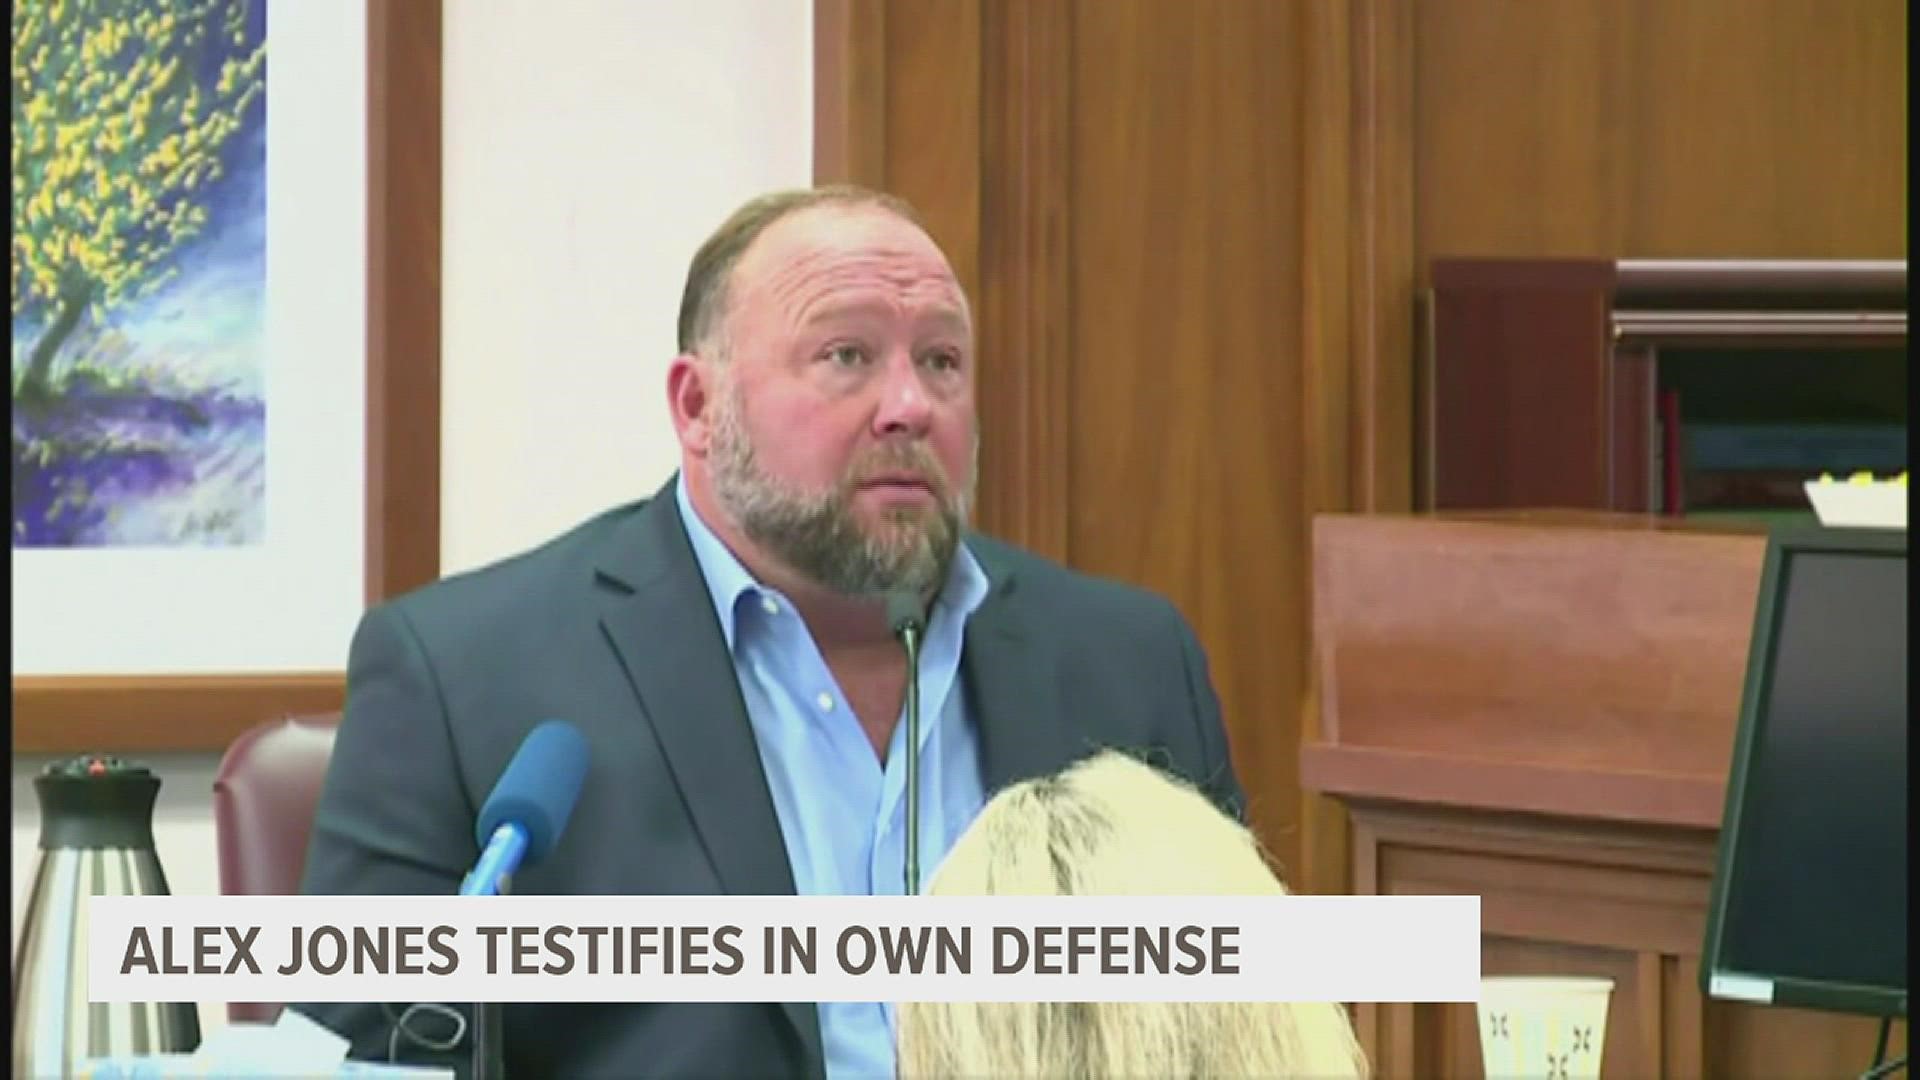 Jones is the only person testifying in defense of himself and his media company, Free Speech Systems.